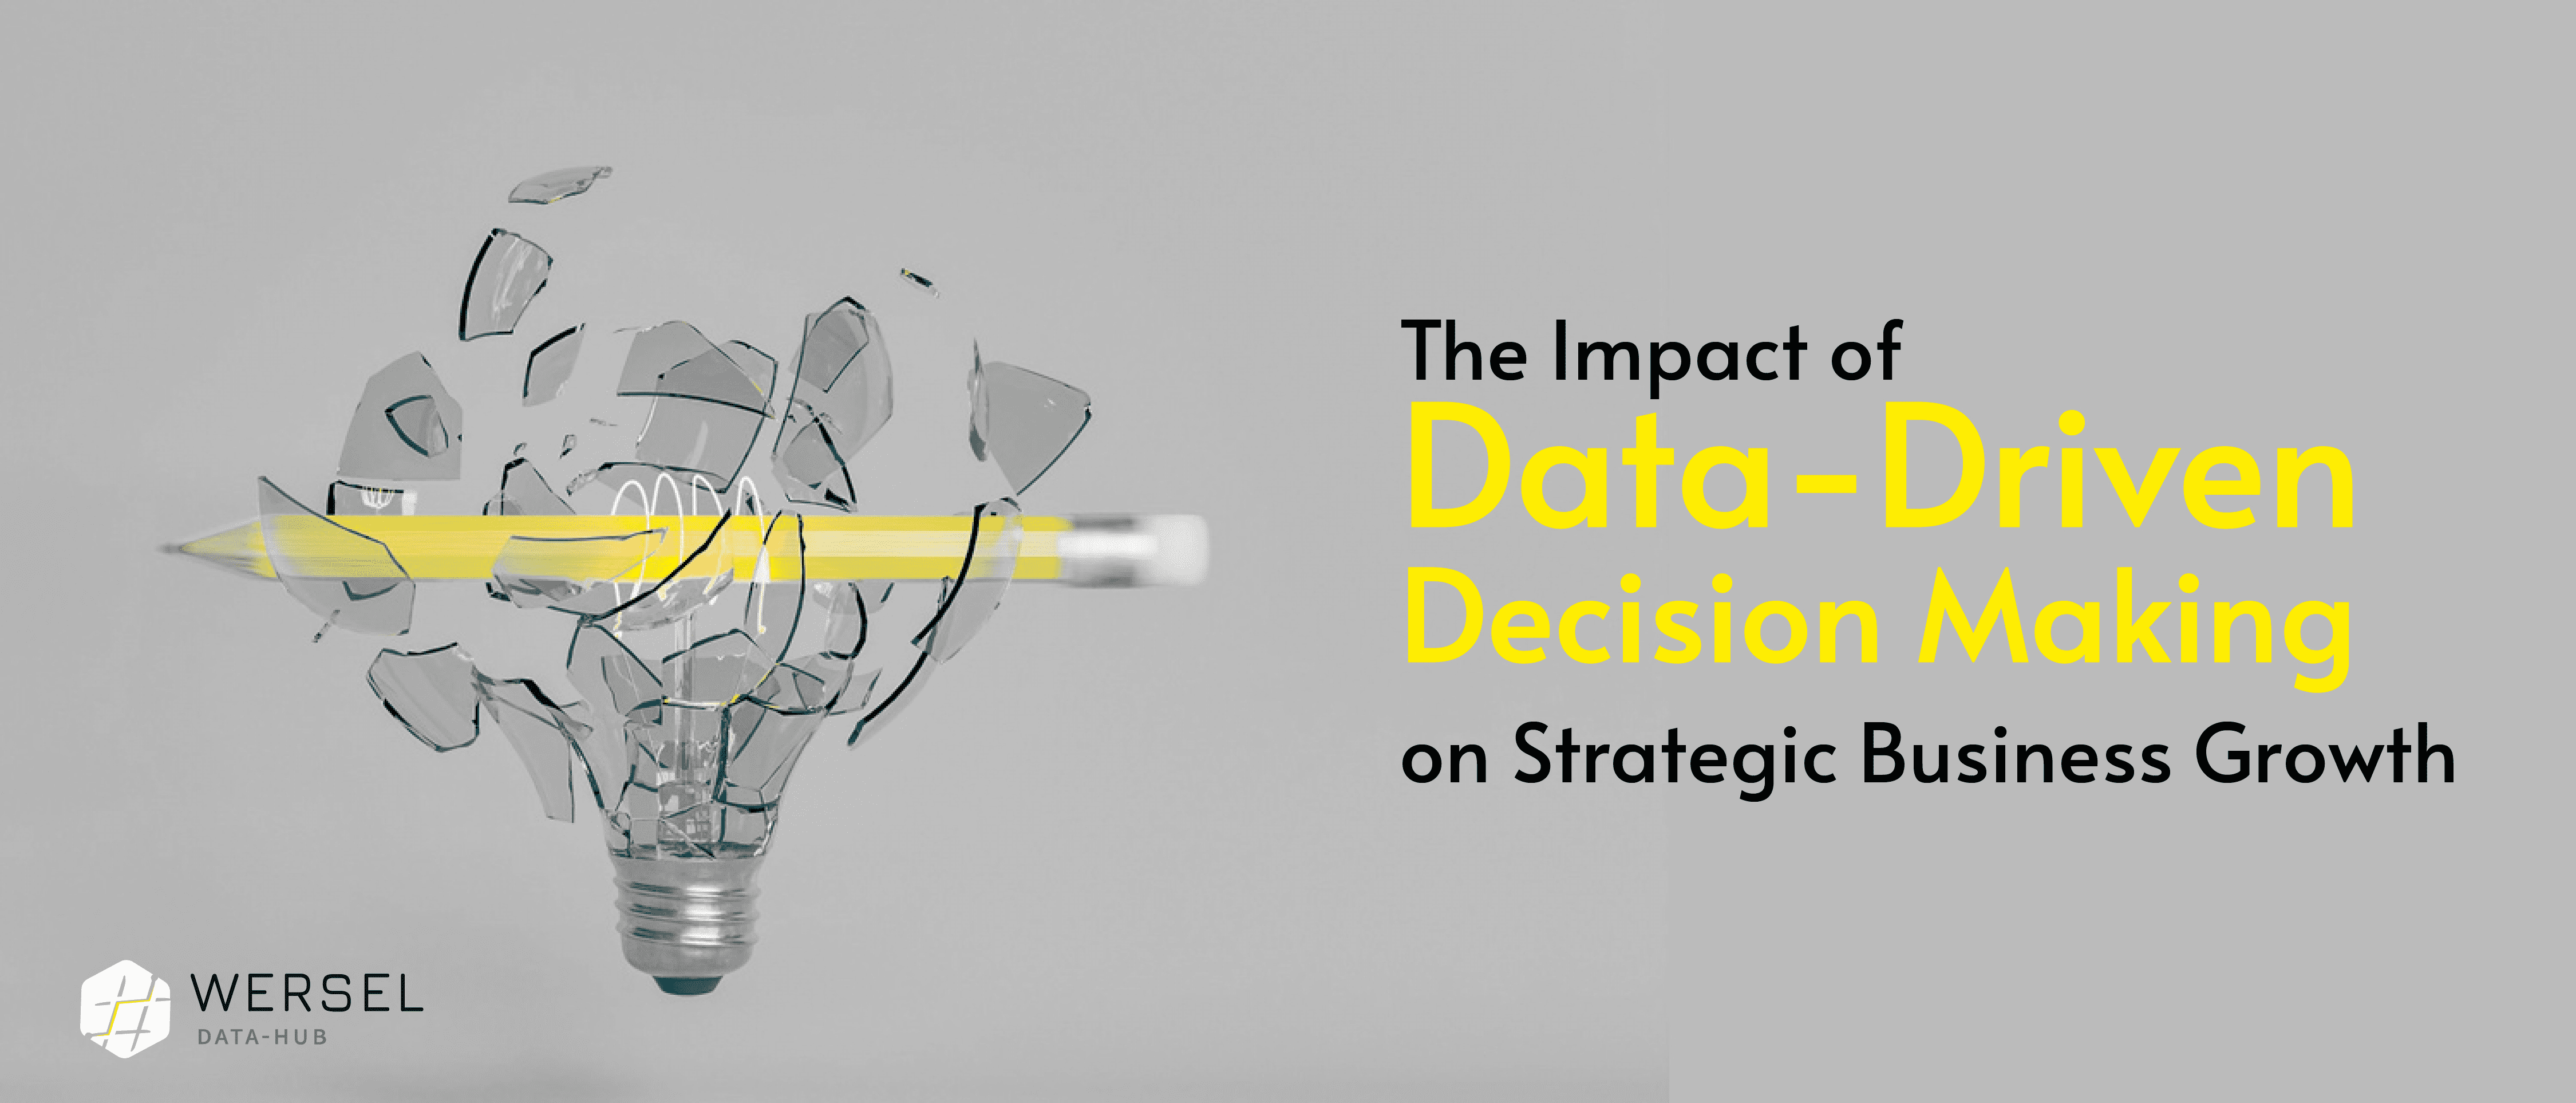 The Impact Of Data-driven Decision Making On Strategic Business Growth